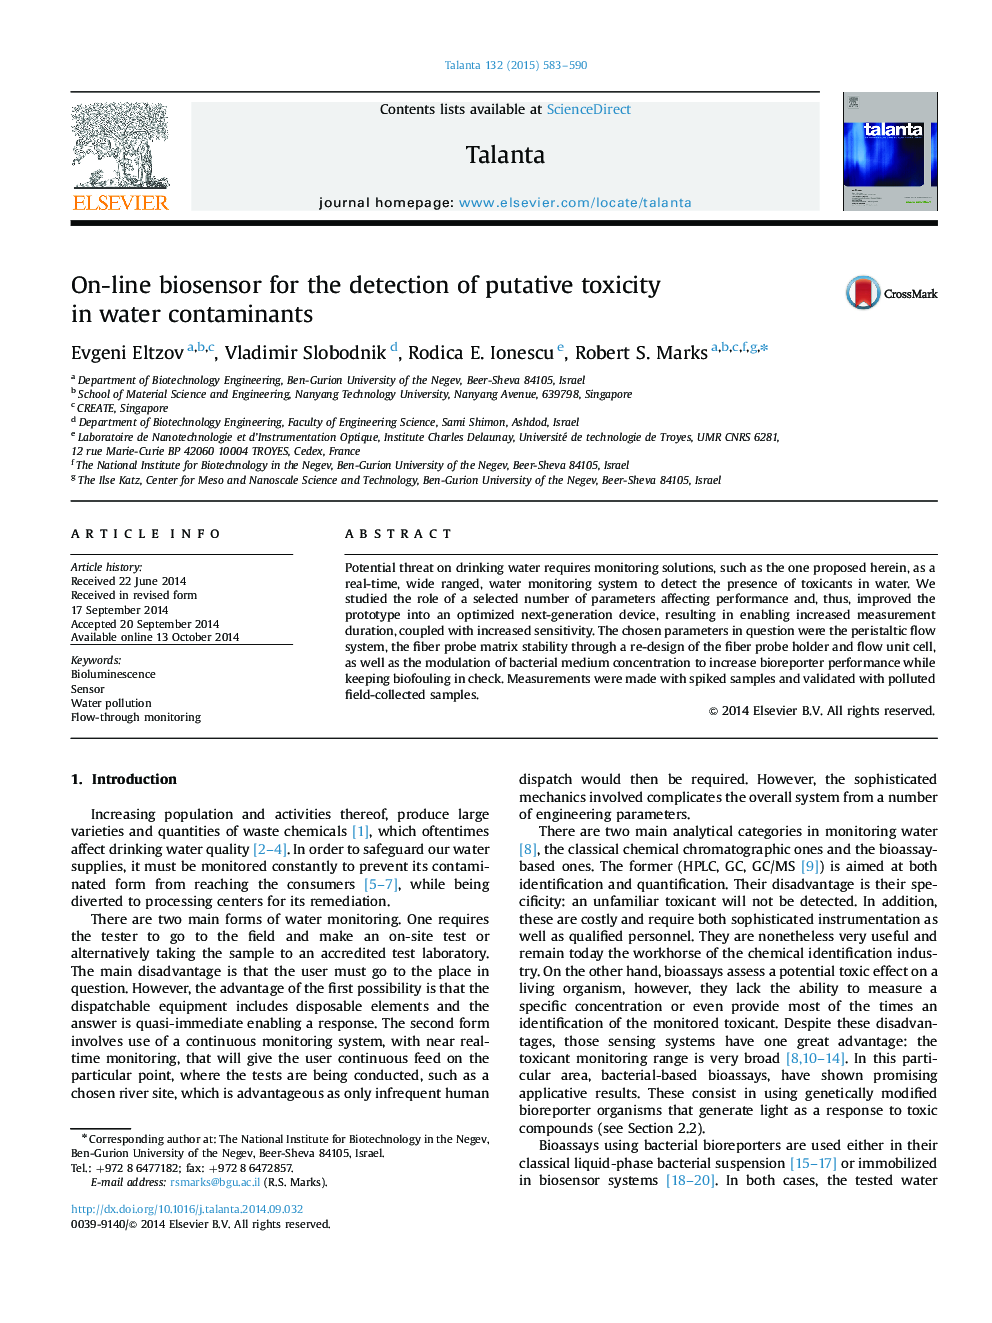 On-line biosensor for the detection of putative toxicity in water contaminants